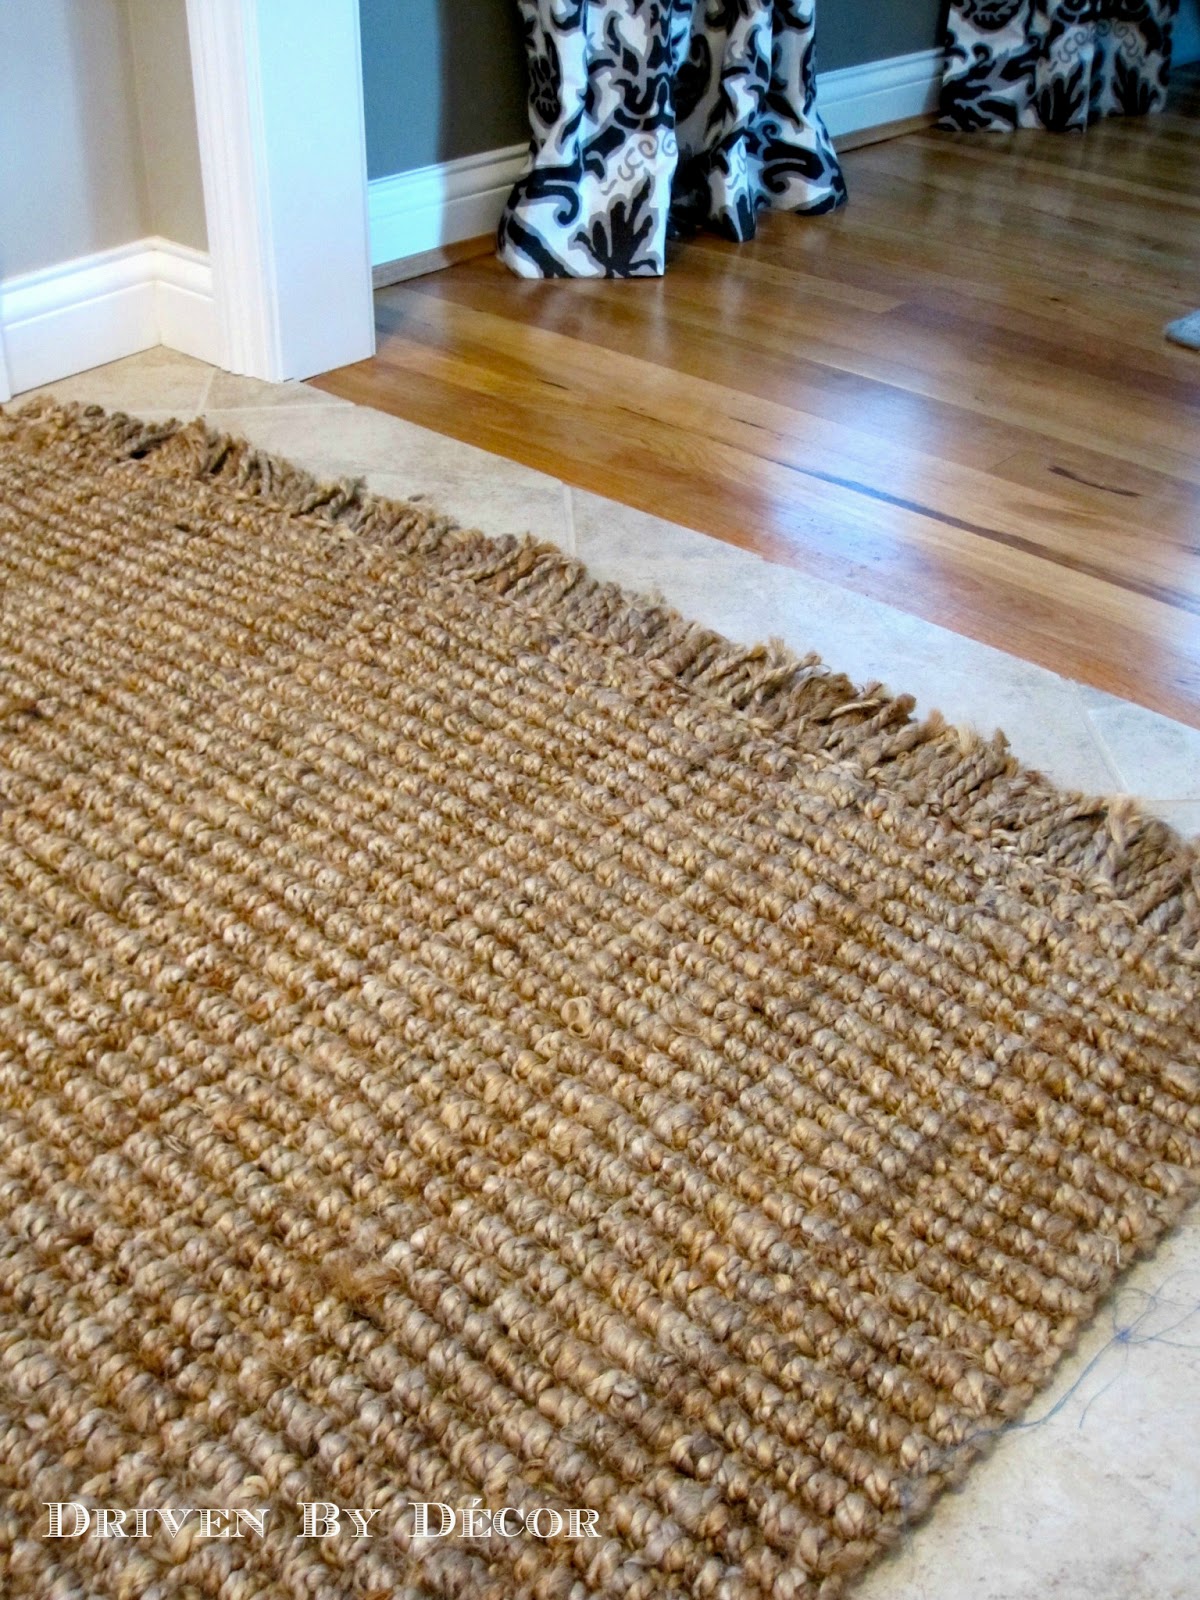 A Great line Source for Inexpensive Area Rugs